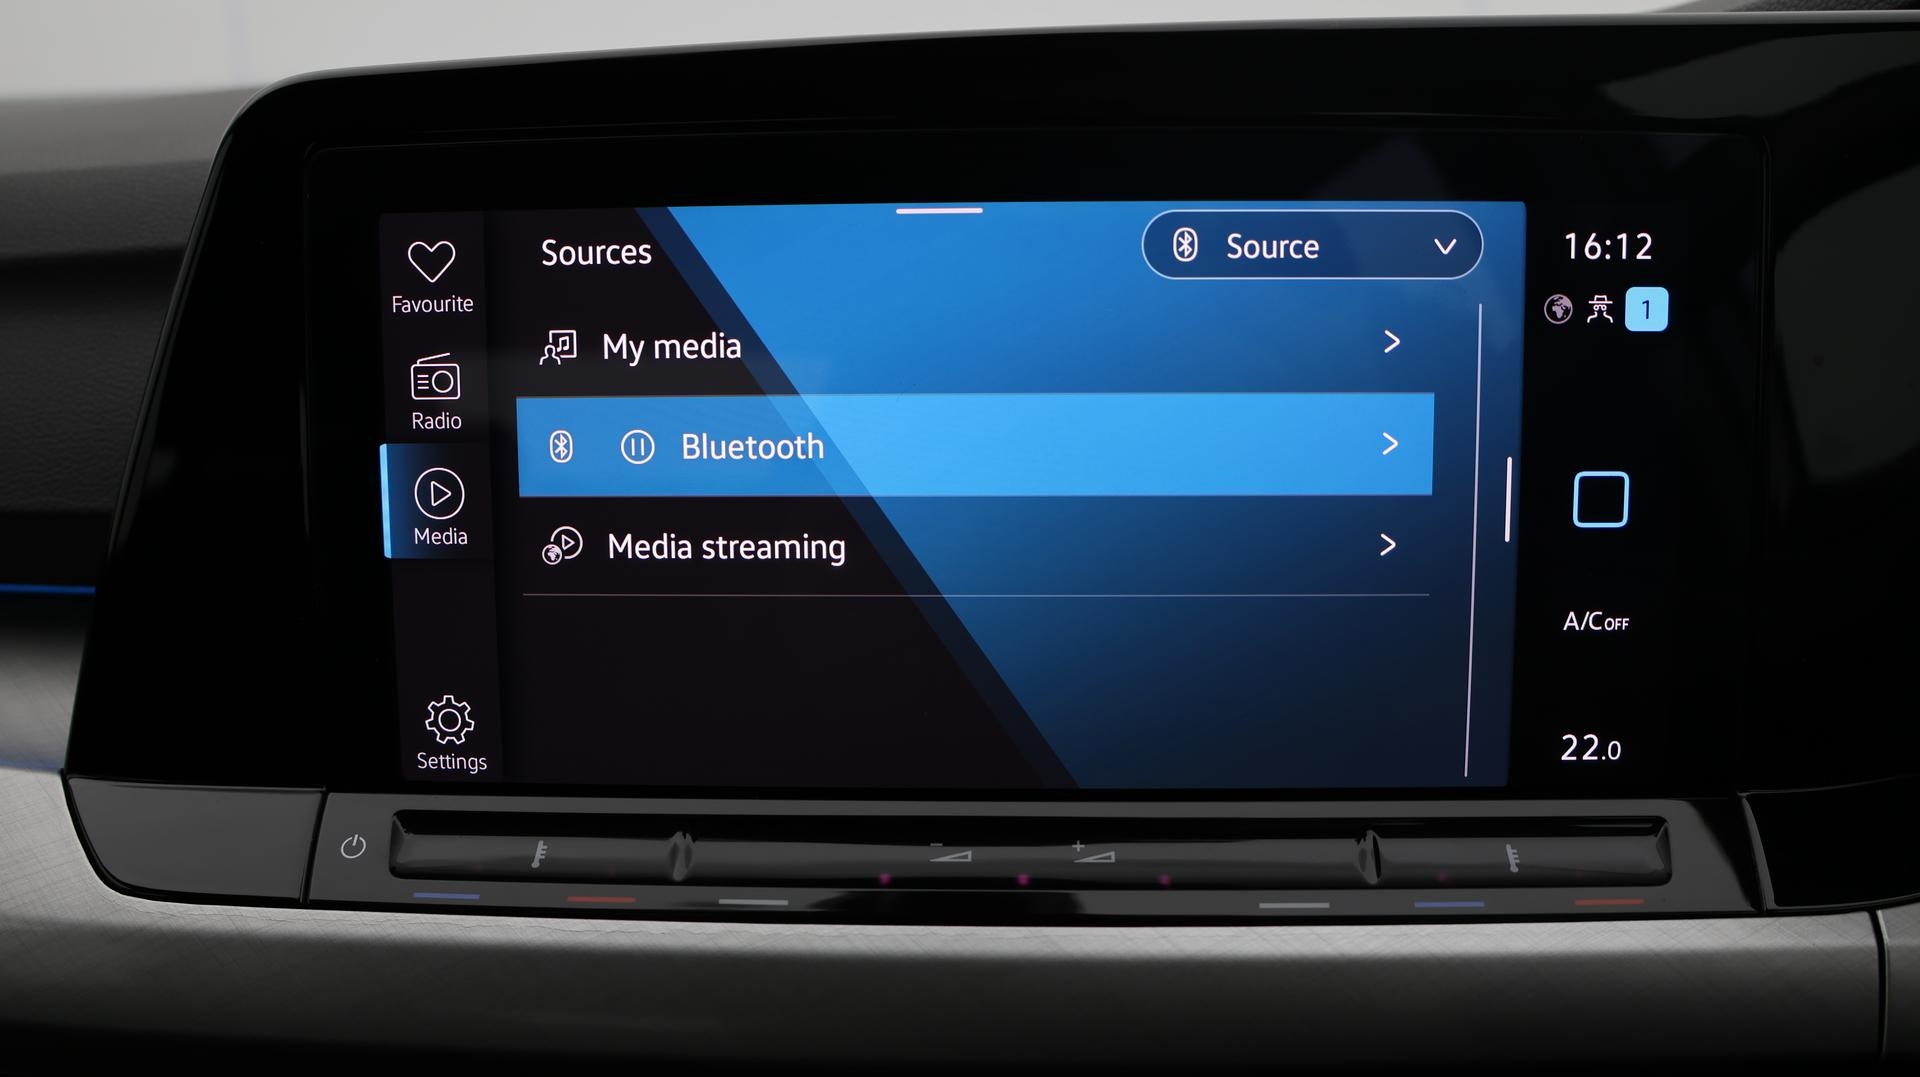 VW Caddy eHybrid Shows It All, Including Massive Infotainment Screen